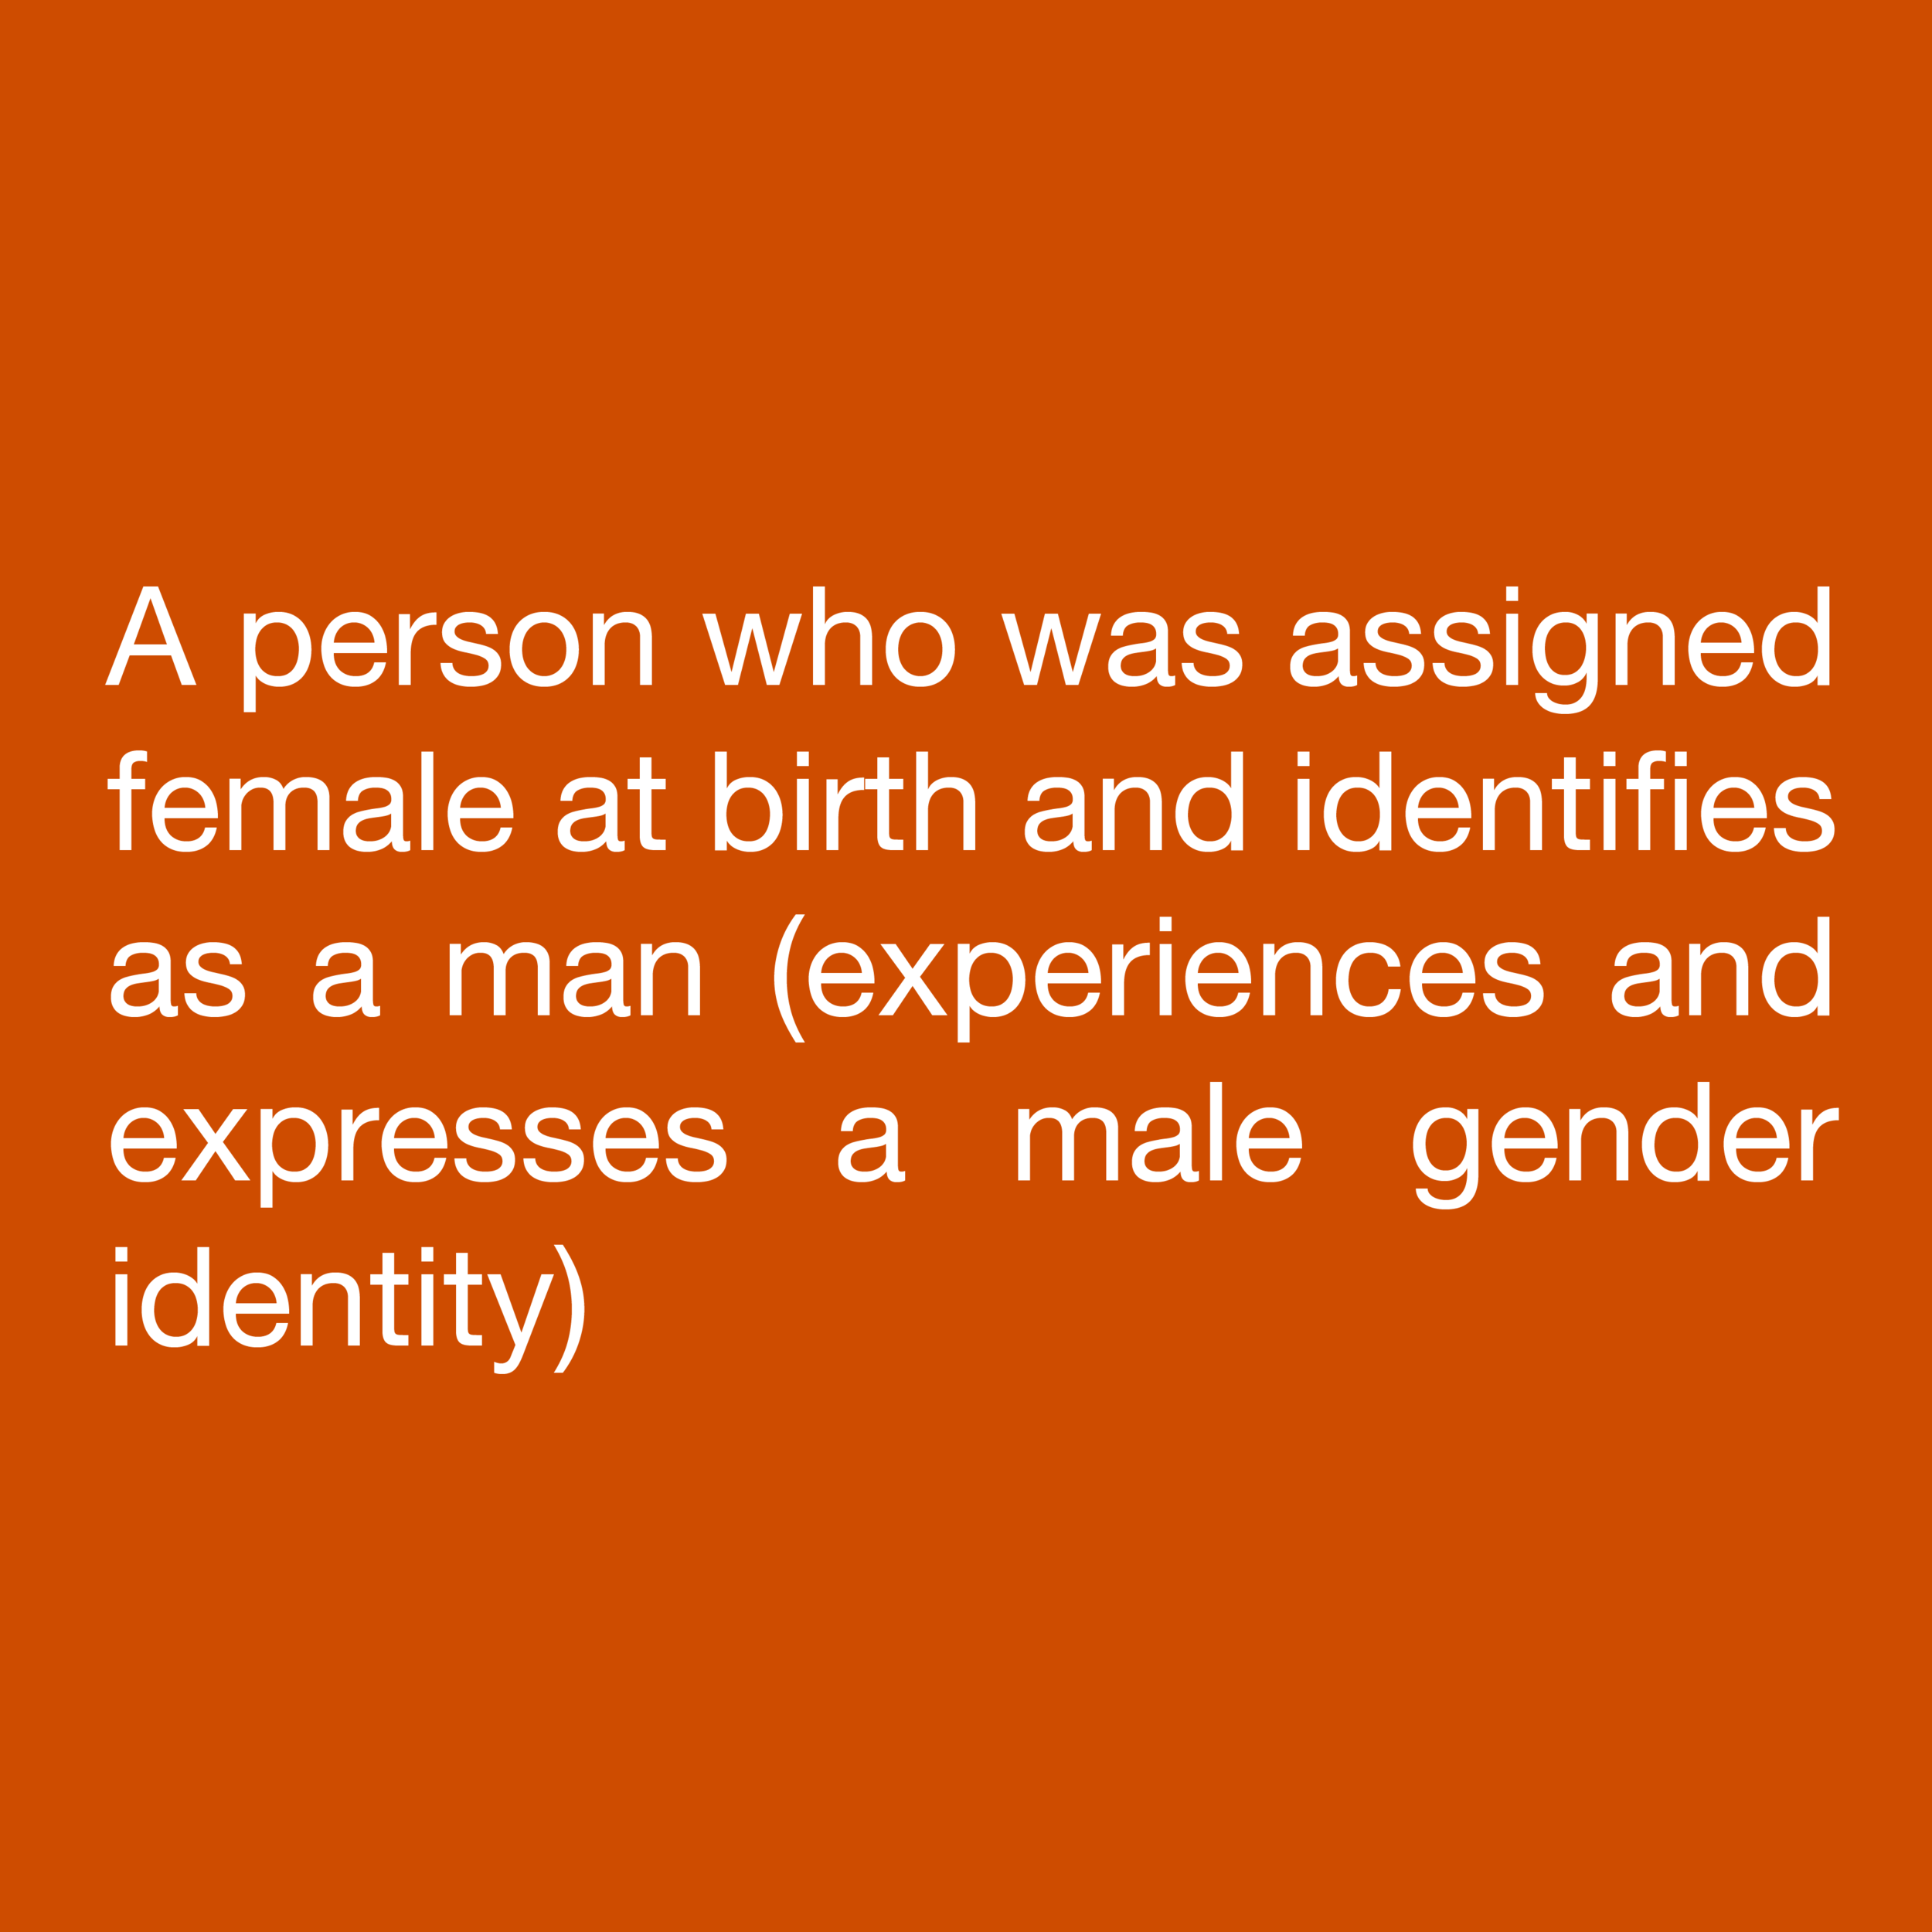  A person who was assigned female at birth and identifies as a man (experiences and expresses a male gender identity) 